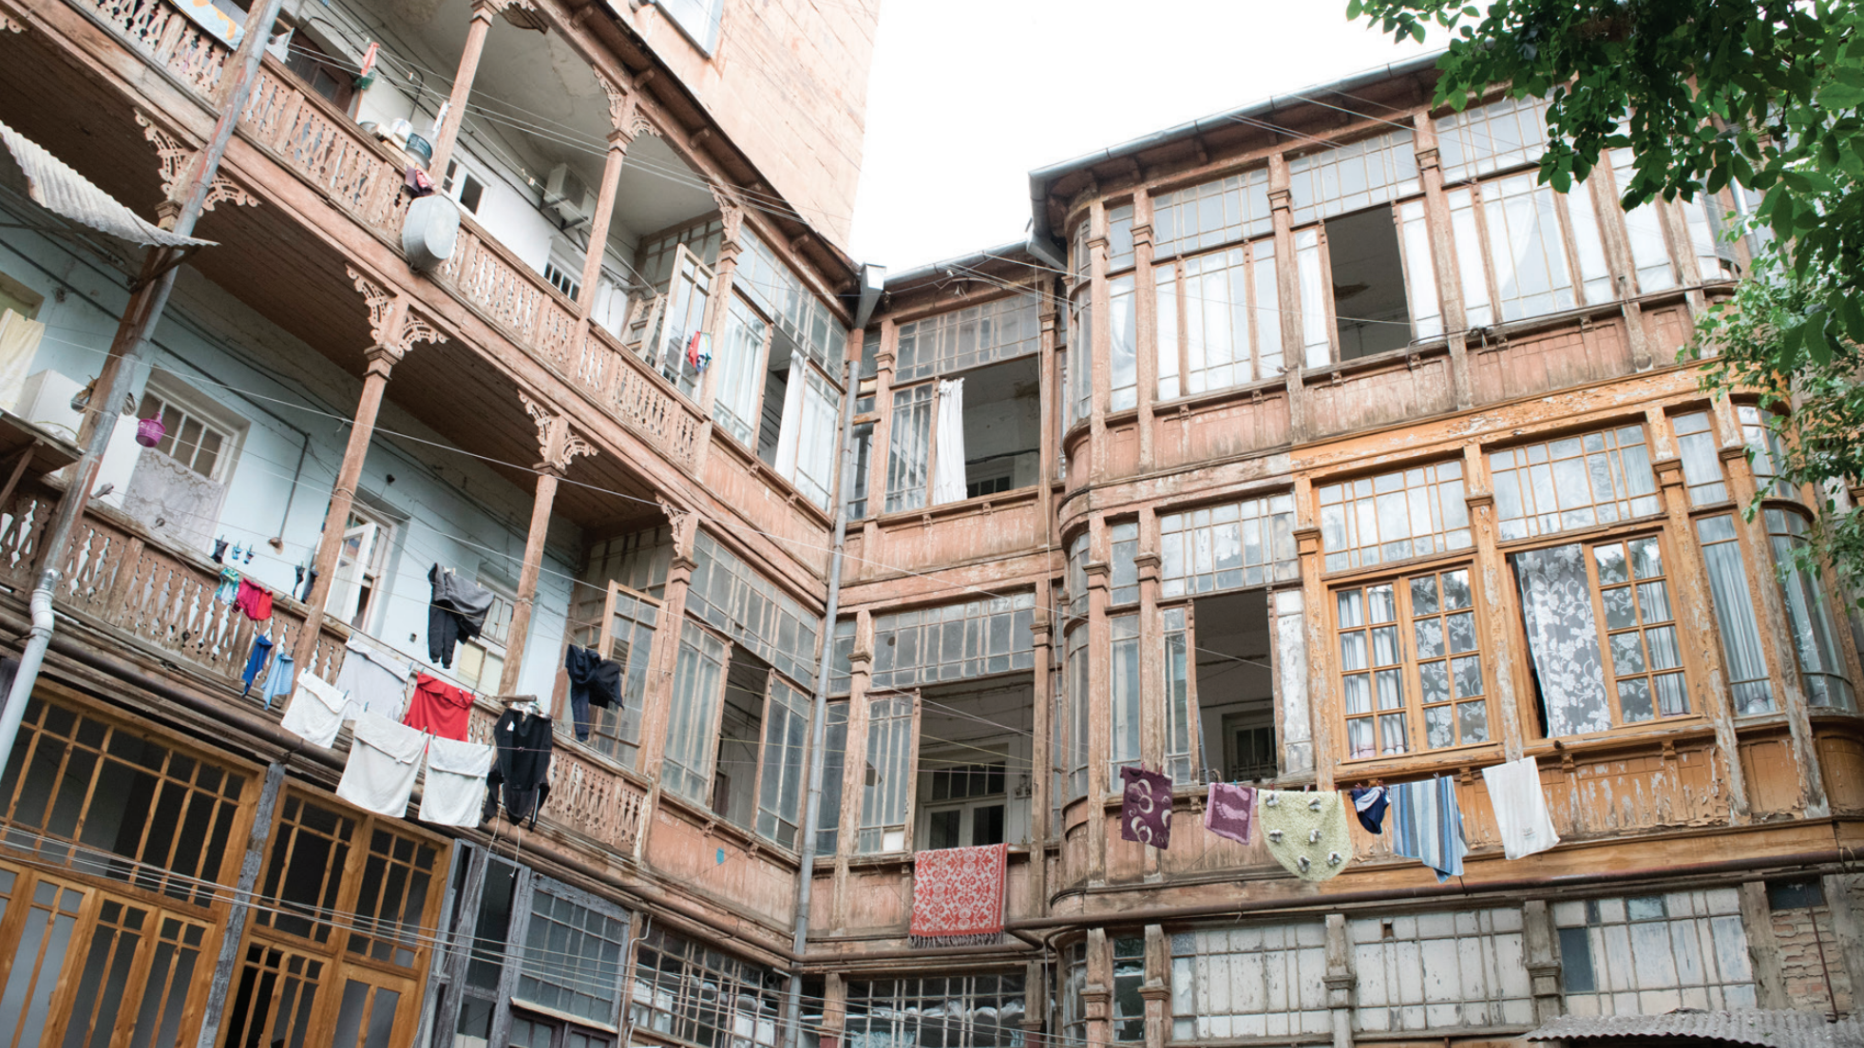 Art Nouveau courtyard with laundry hanging on lines